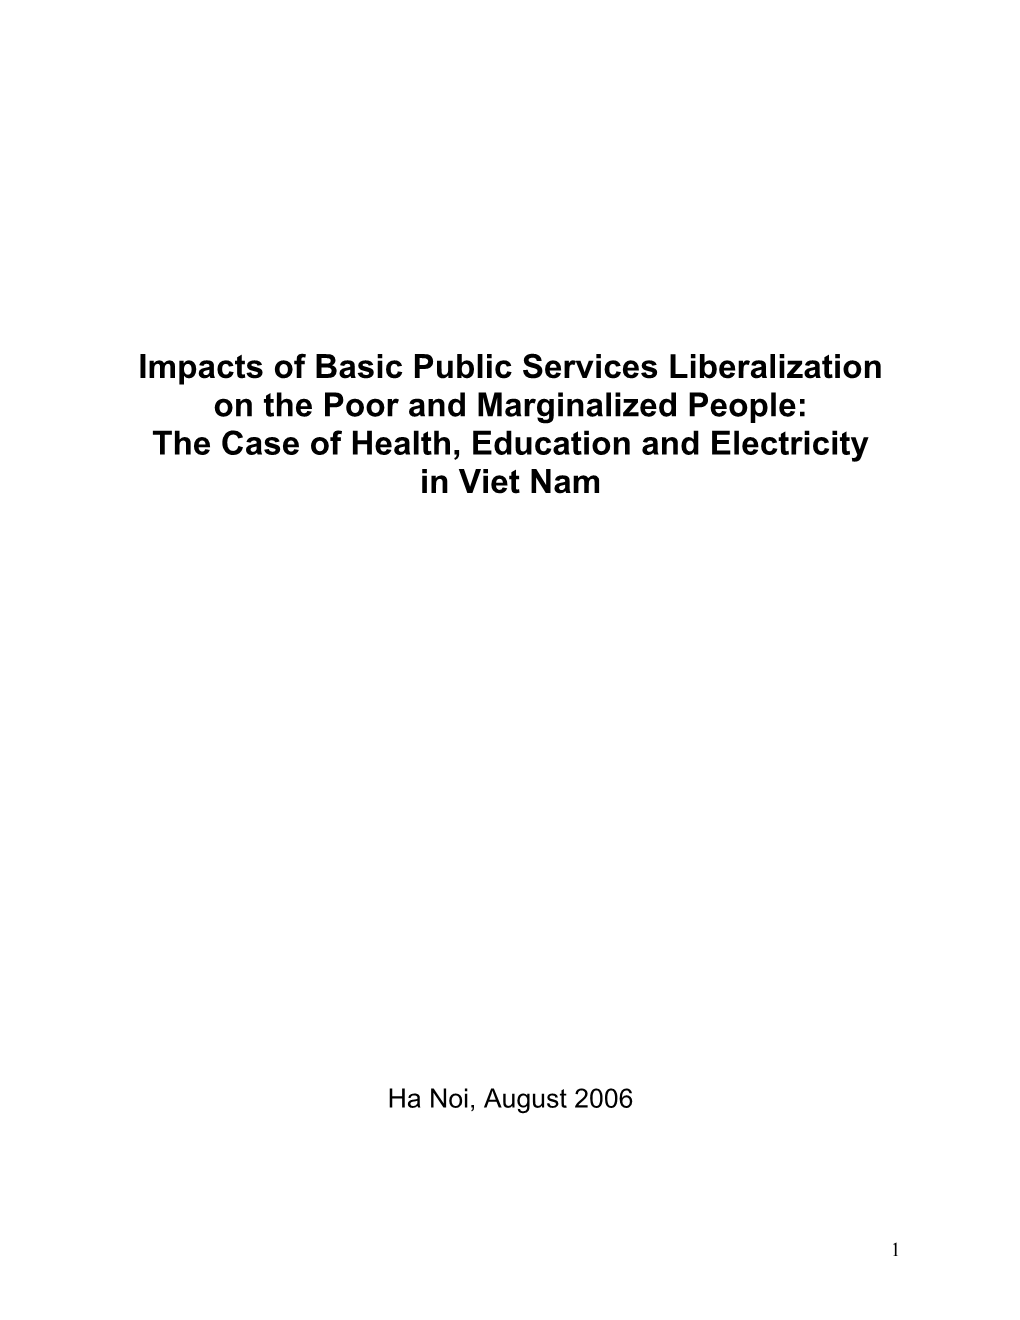 Impacts of Basic Public Services Liberalization on the Poor and Marginalized People: the Case of Health, Education and Electricity in Viet Nam